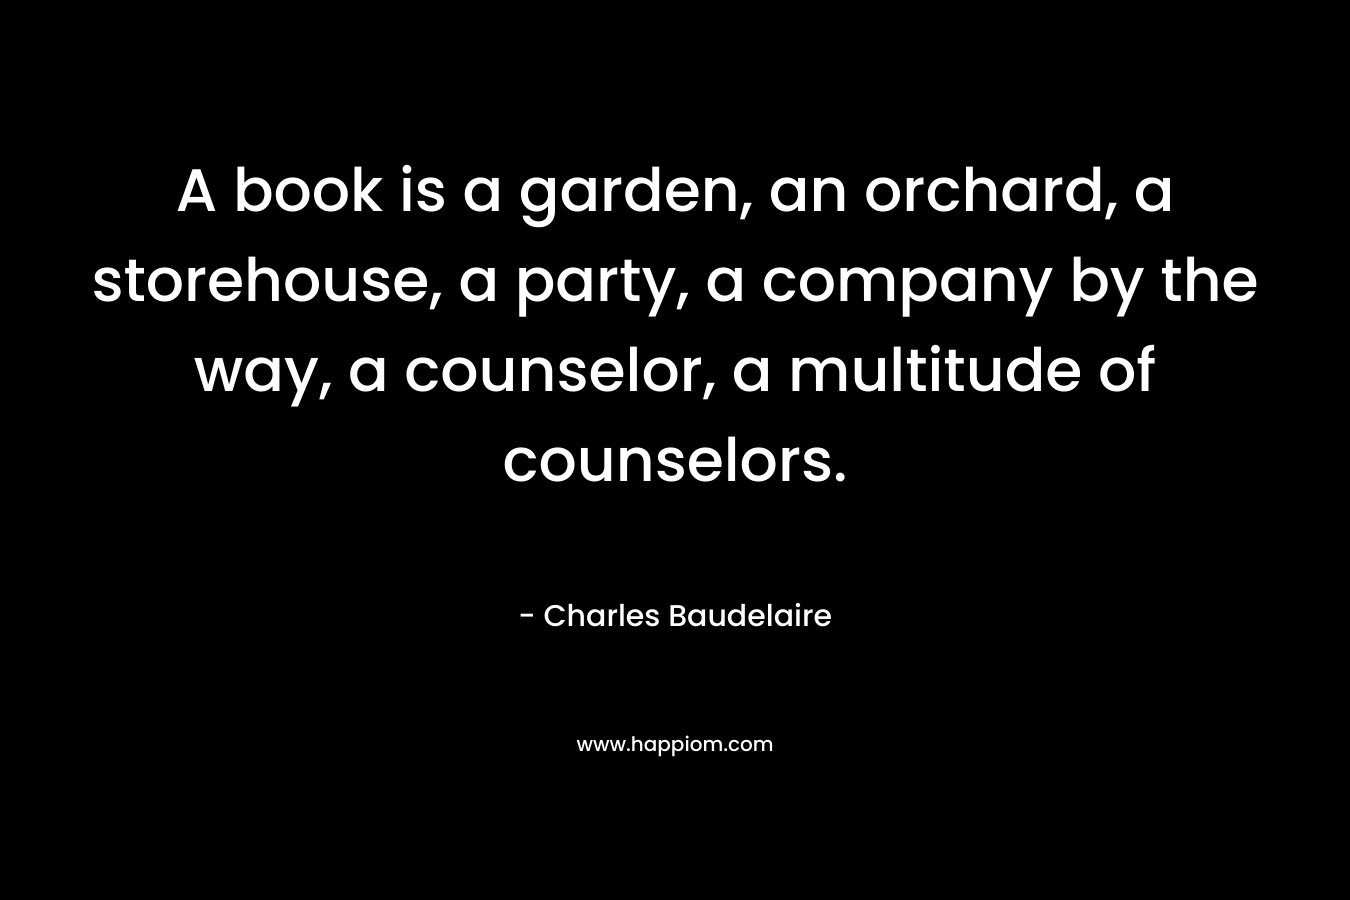 A book is a garden, an orchard, a storehouse, a party, a company by the way, a counselor, a multitude of counselors.